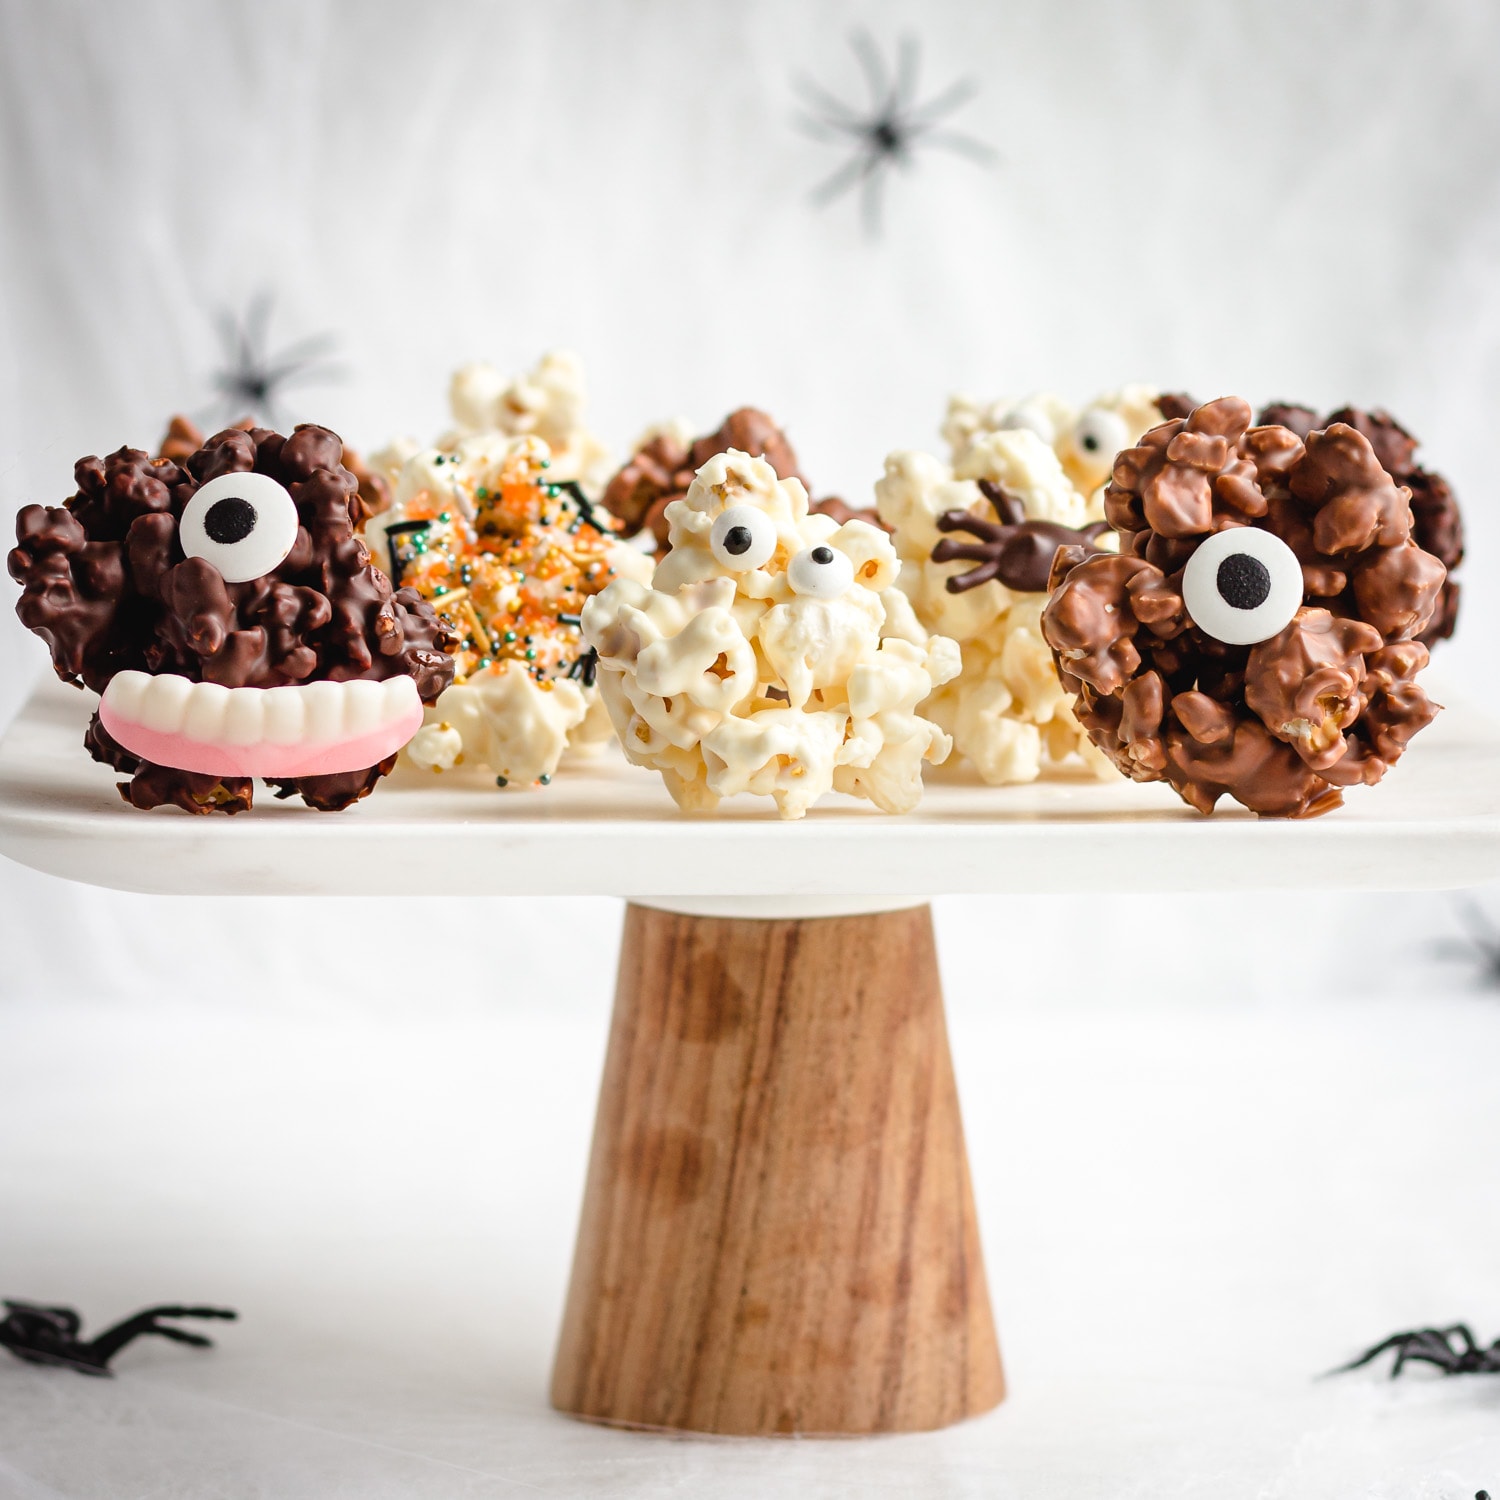 Cake stand with a variety of different Halloween popcorn balls on it.